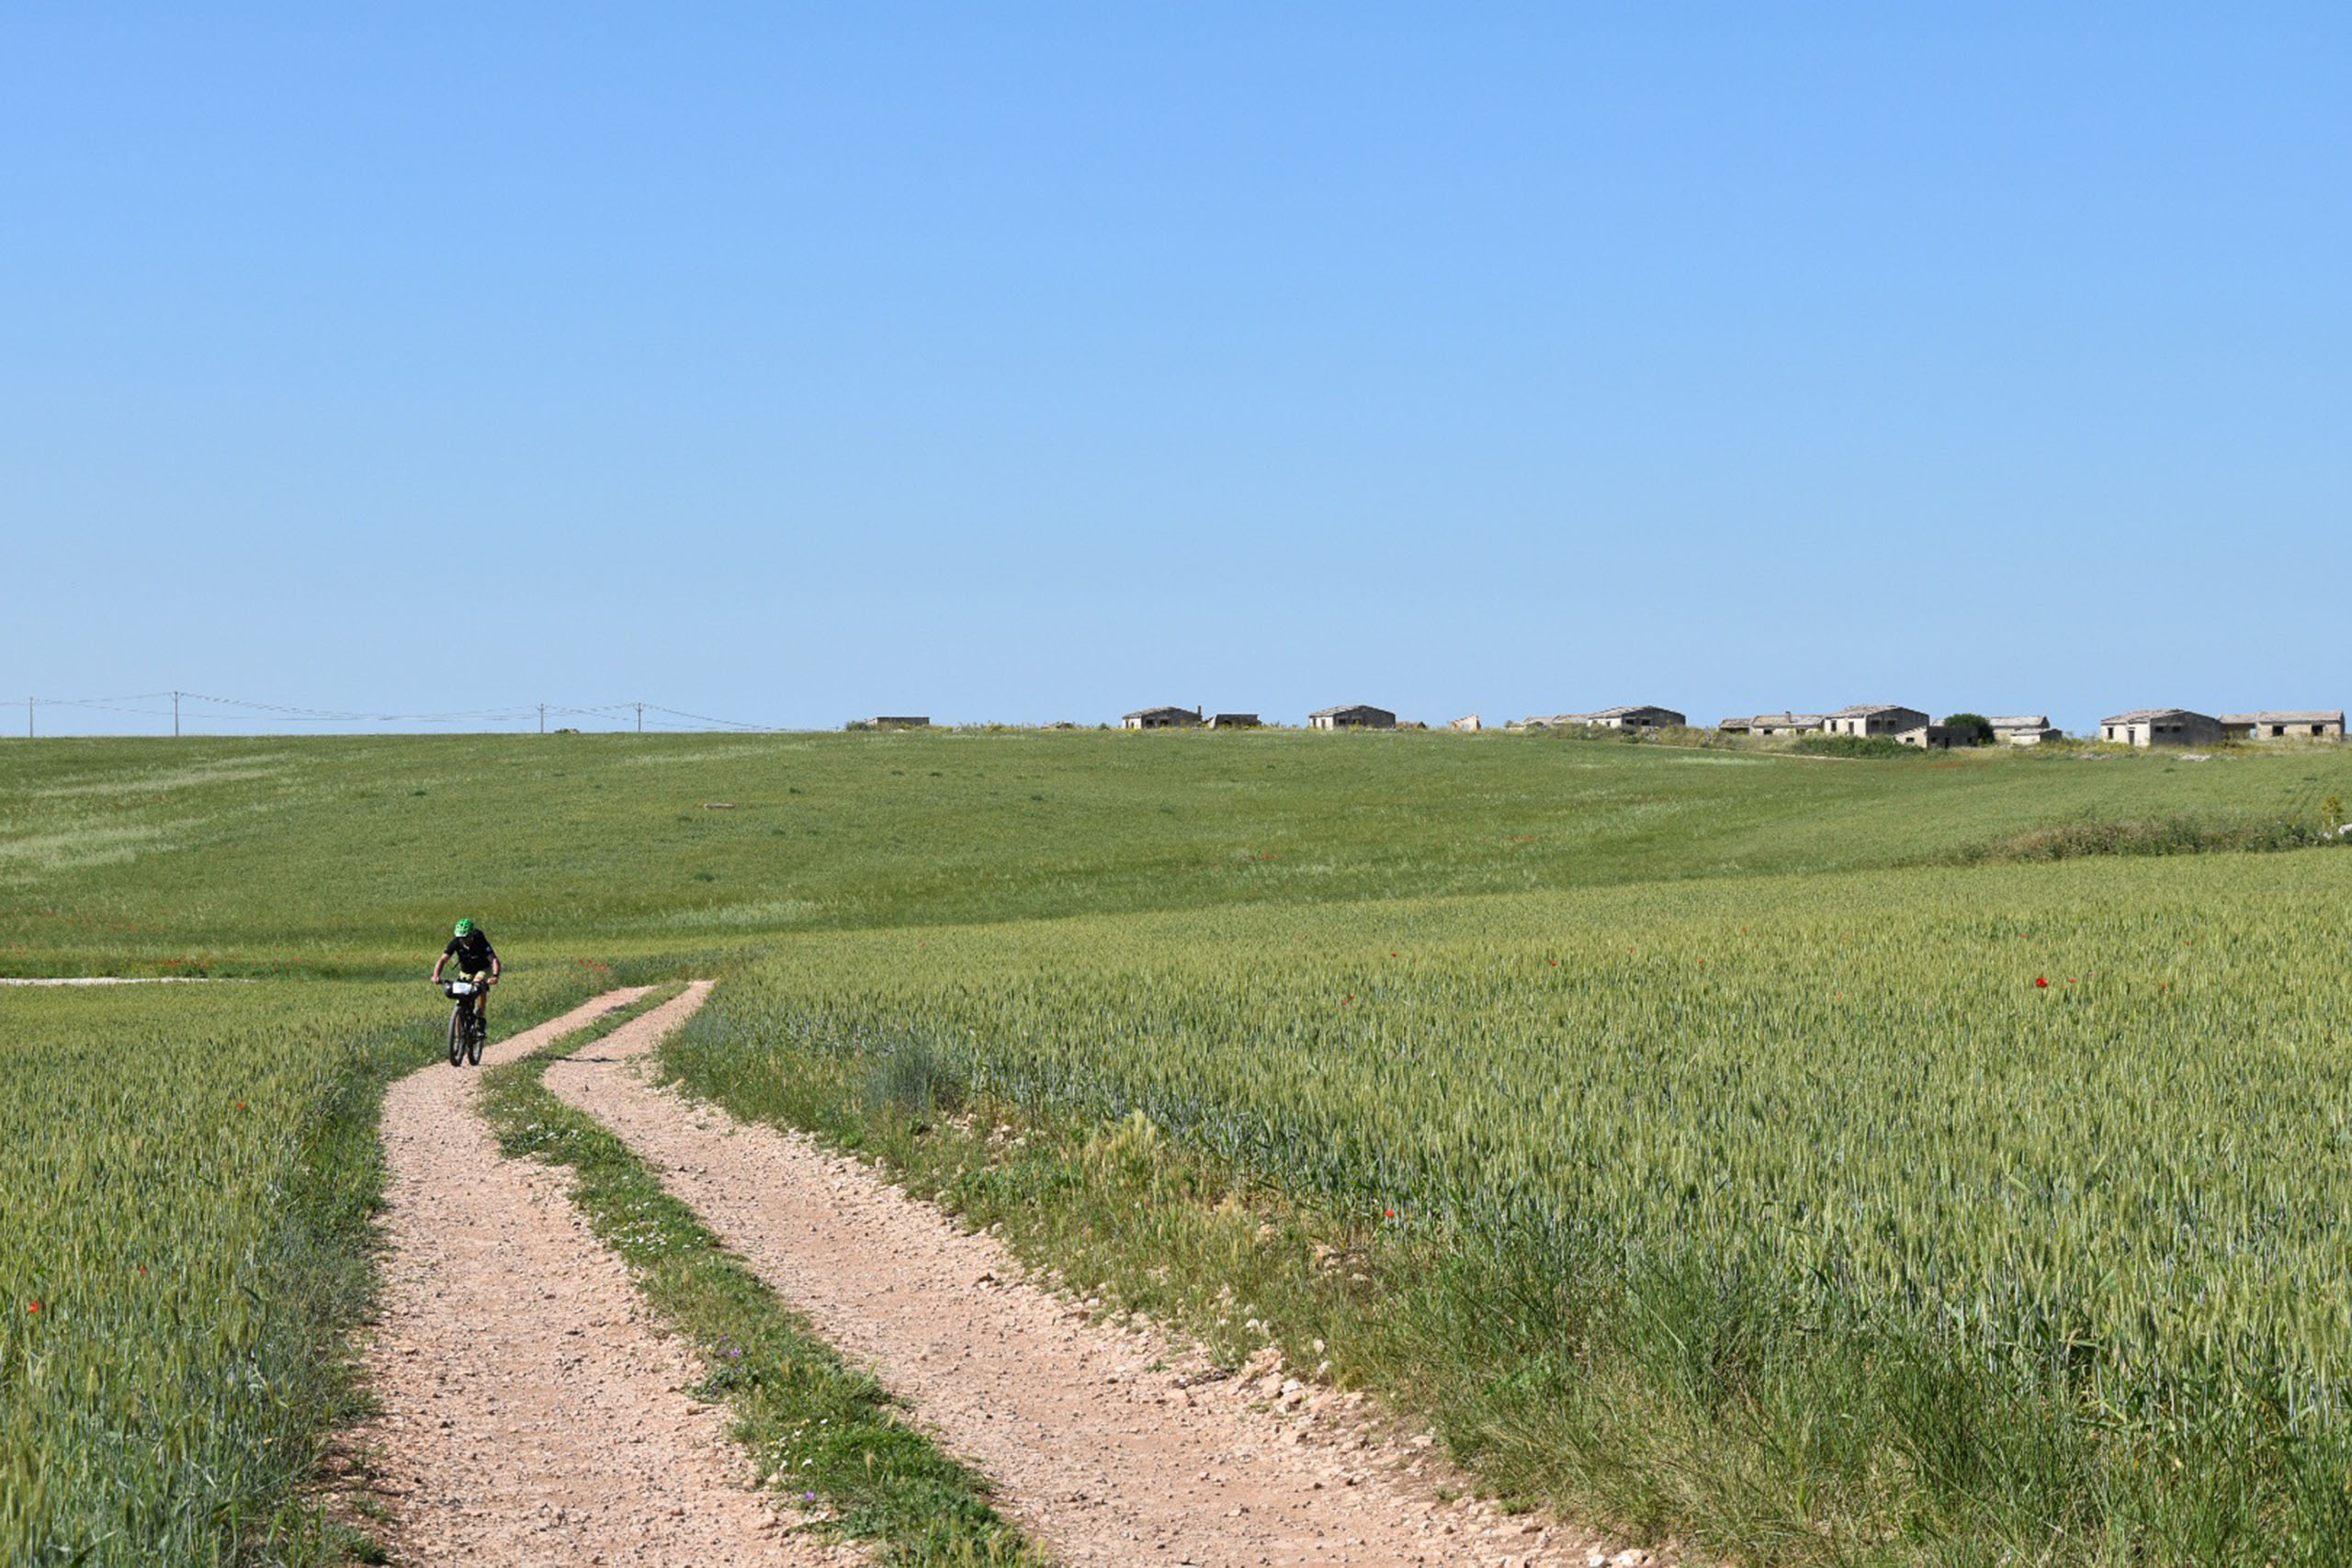 Join Apulia Trail 2020